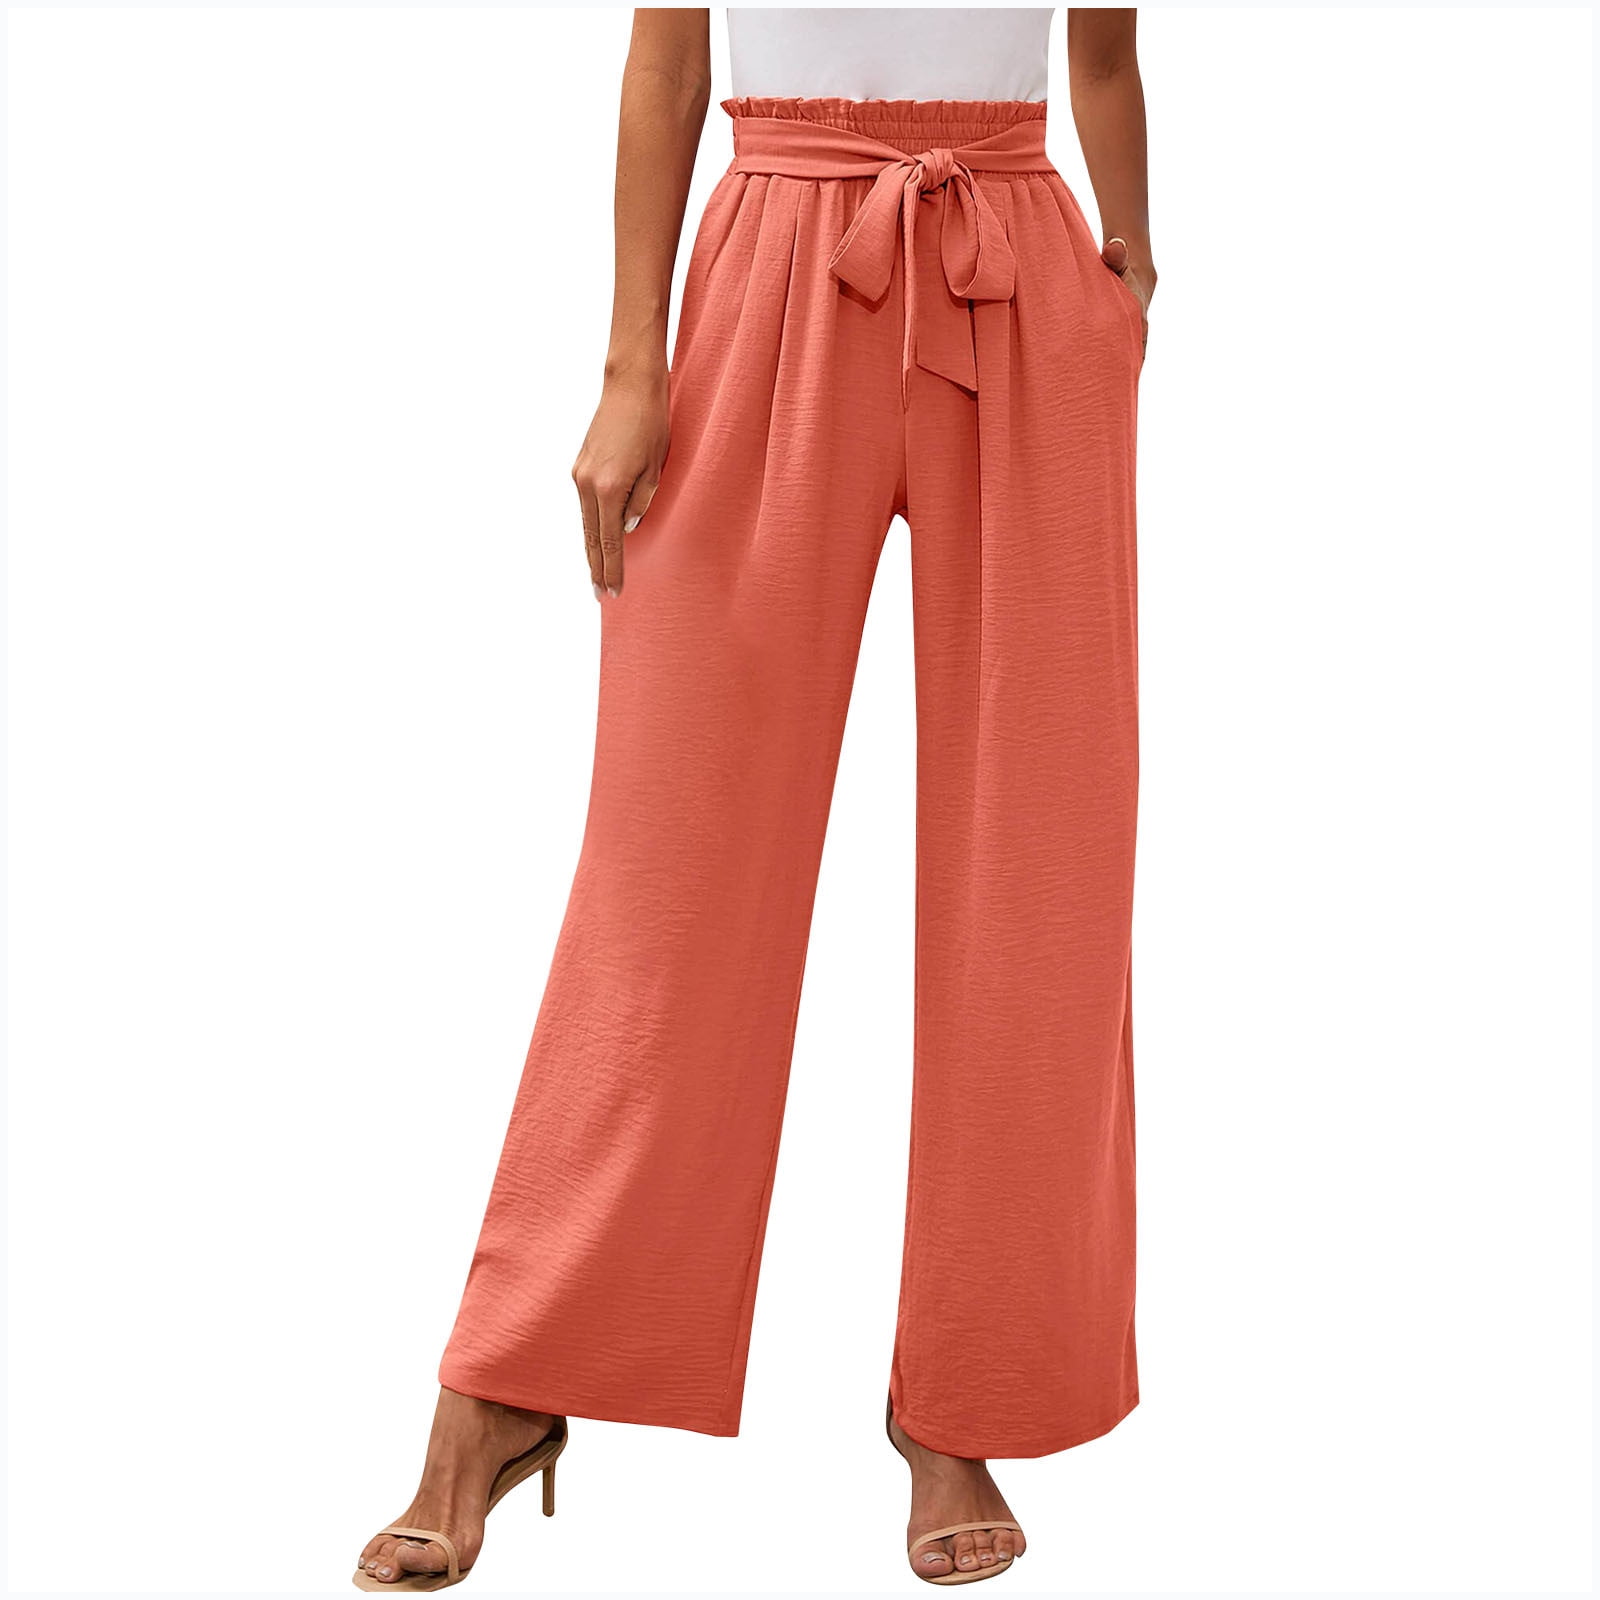 IEPOFG Women's High Waist Casual Palazzo Pants Color Block Tummy Control  Wide Leg Trousers with Pockets Patchwork Baggy Jeans